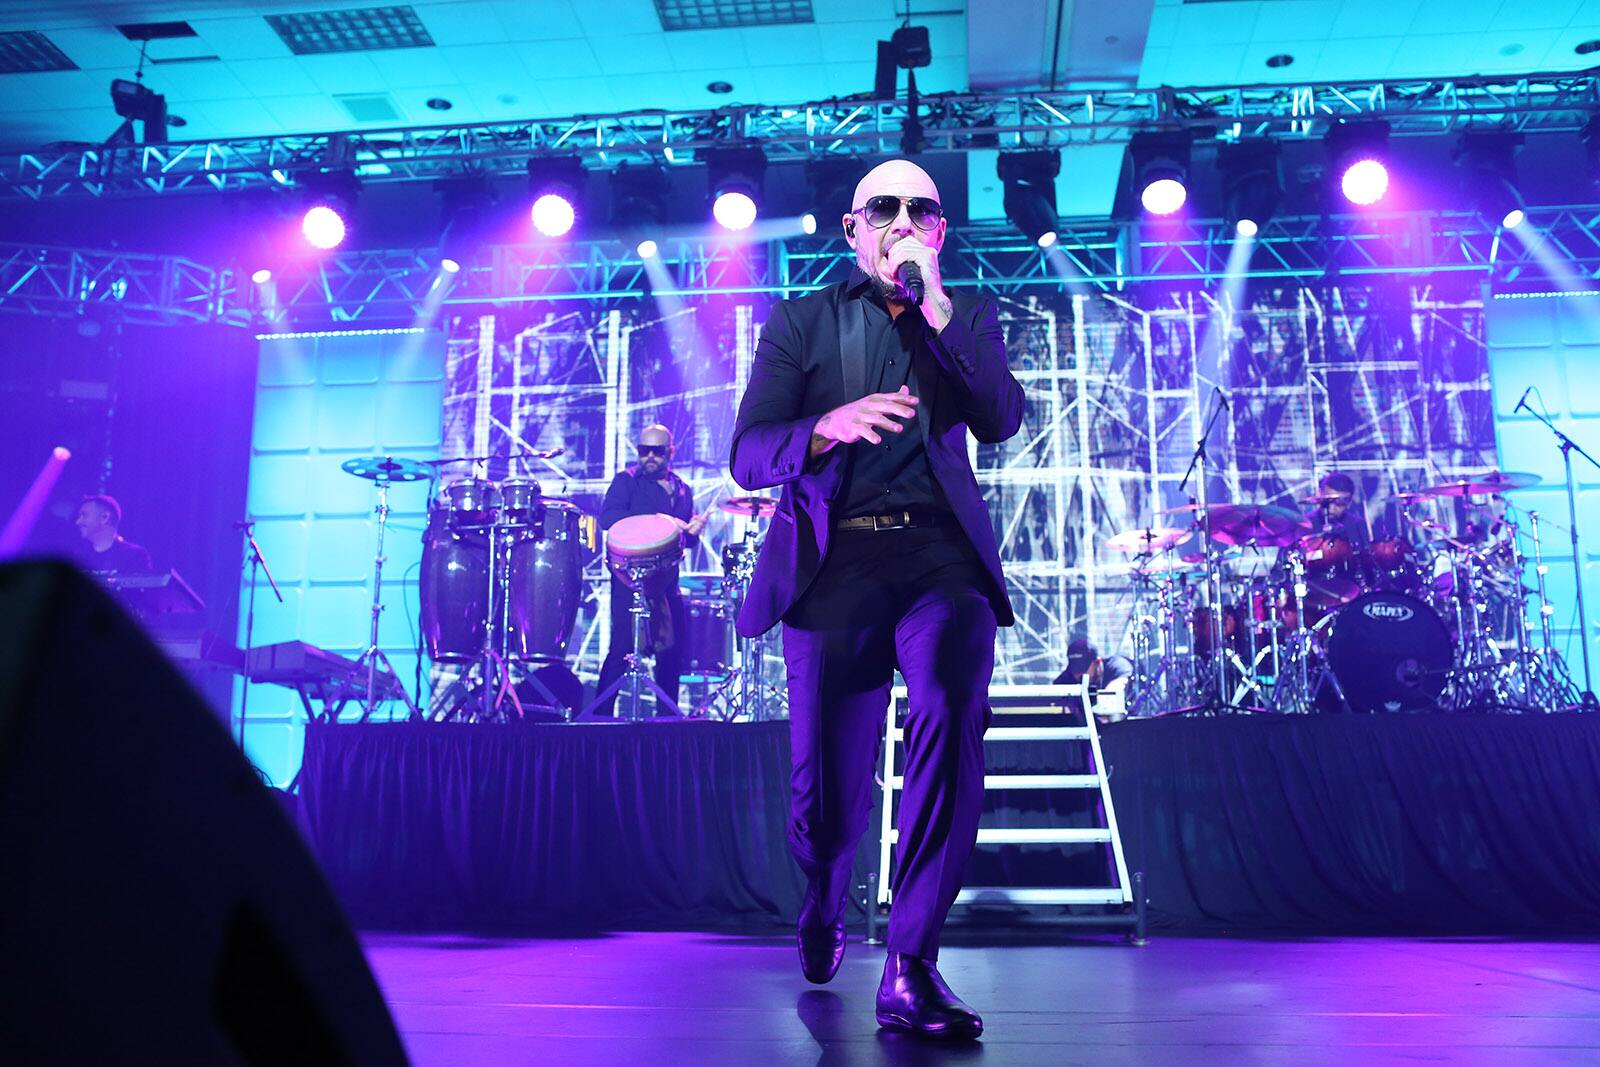 Pitbull Performs at CruiseWorld 2018 Event Hosted by Norwegian